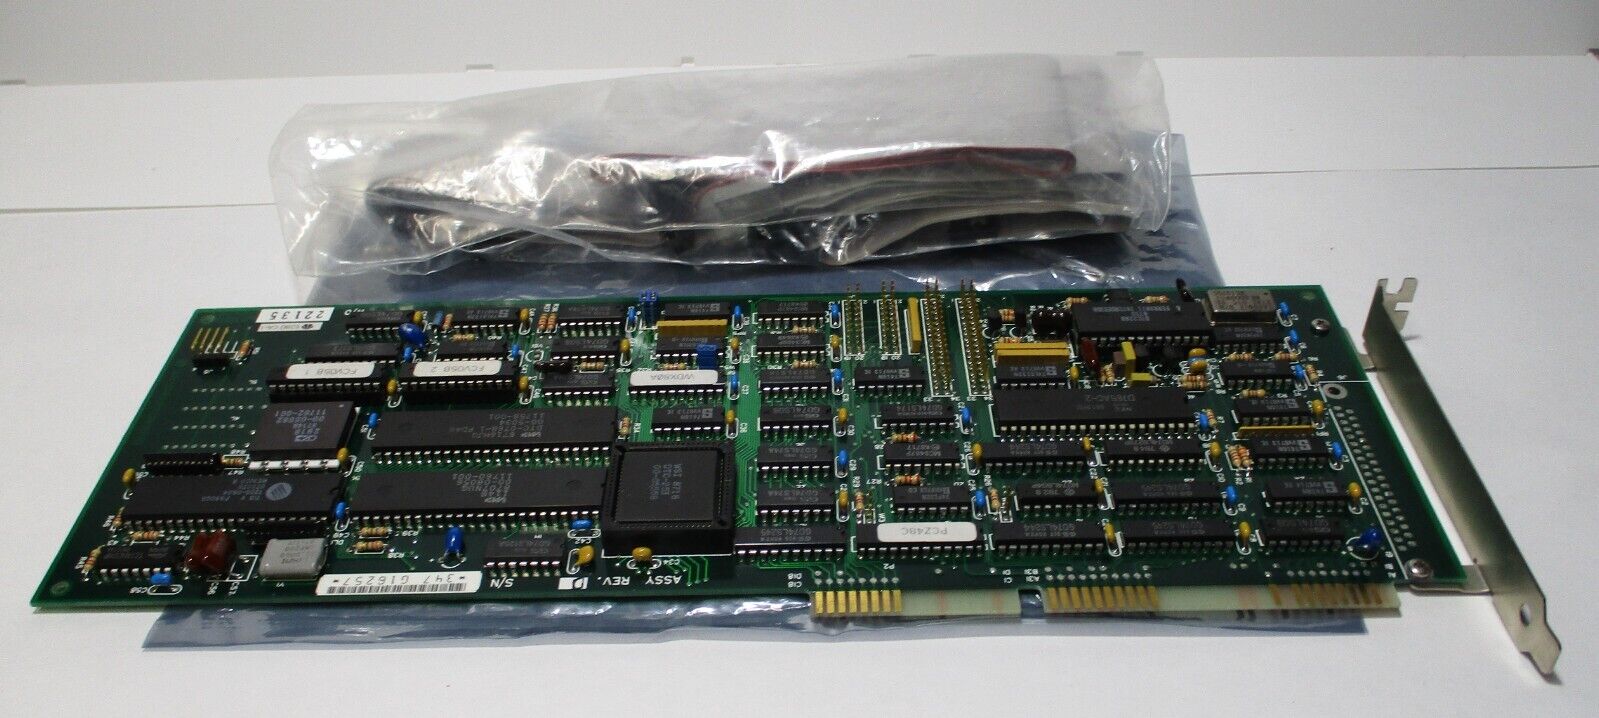 DTC 16-Bit ISA AT Dual Winchester/ MFM Hard Drive & Floppy Controller 5280 CA-I